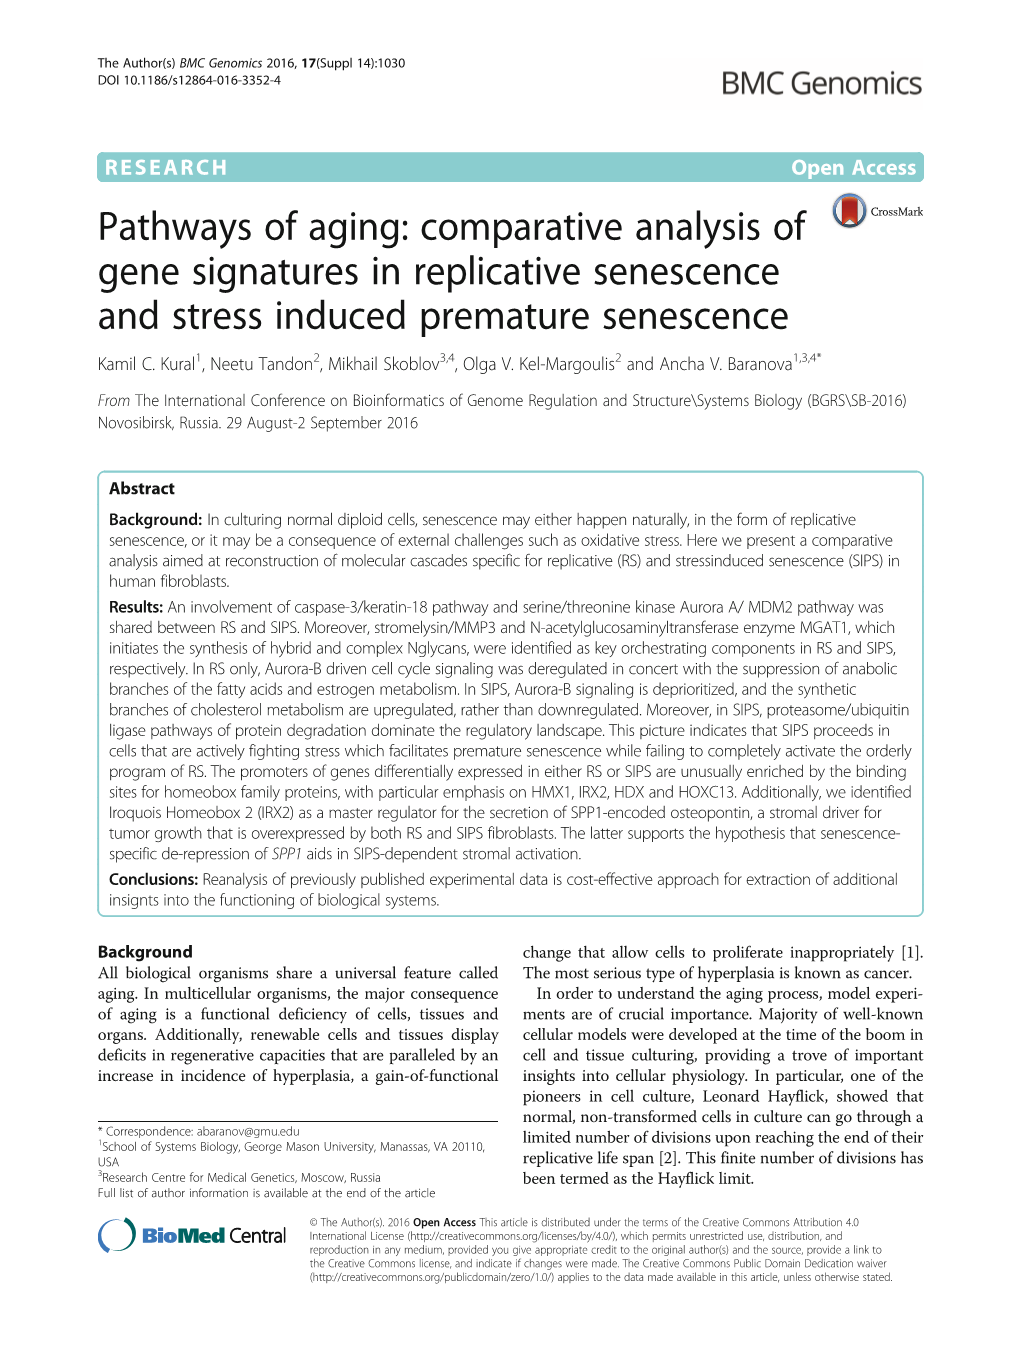 Downloaded from Gene Expression Molecules That Influence the Senescence Pathways [13]